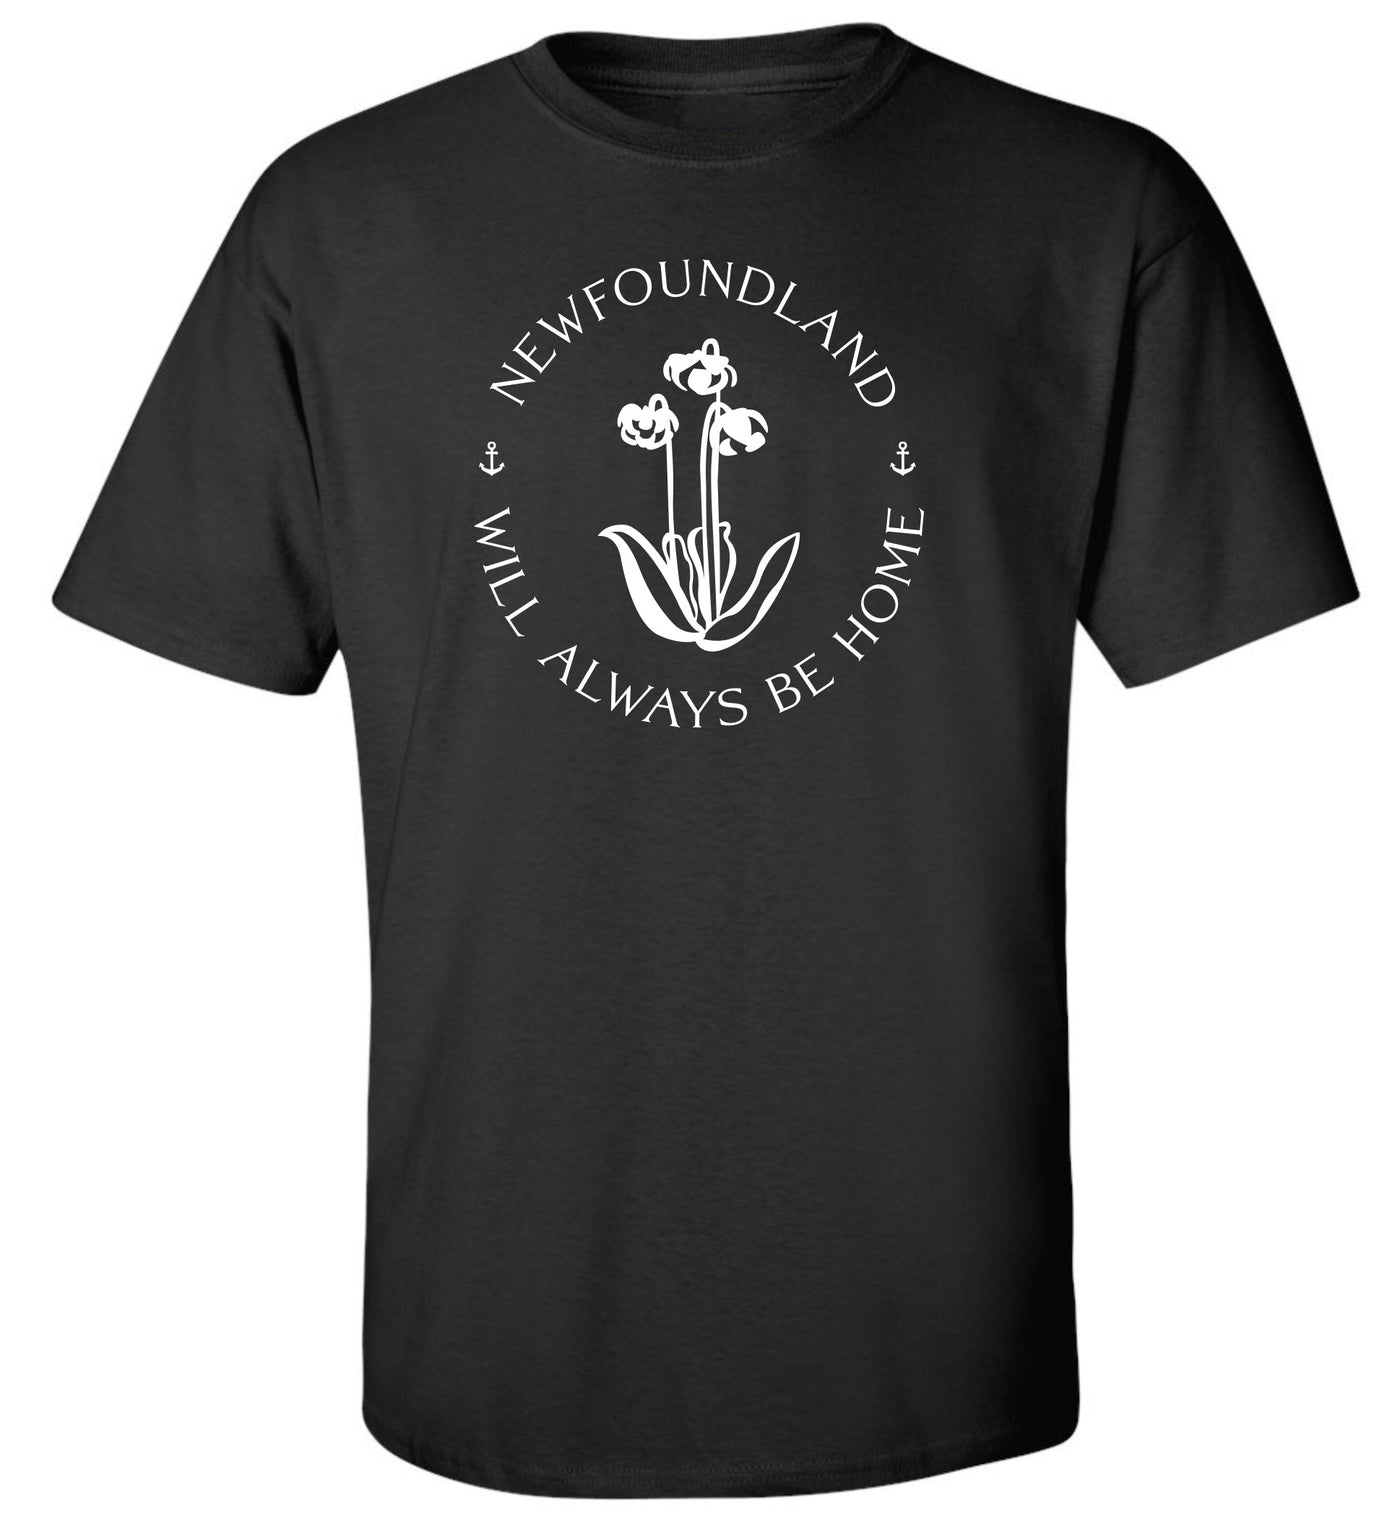 "Newfoundland Will Always Be Home" T-Shirt